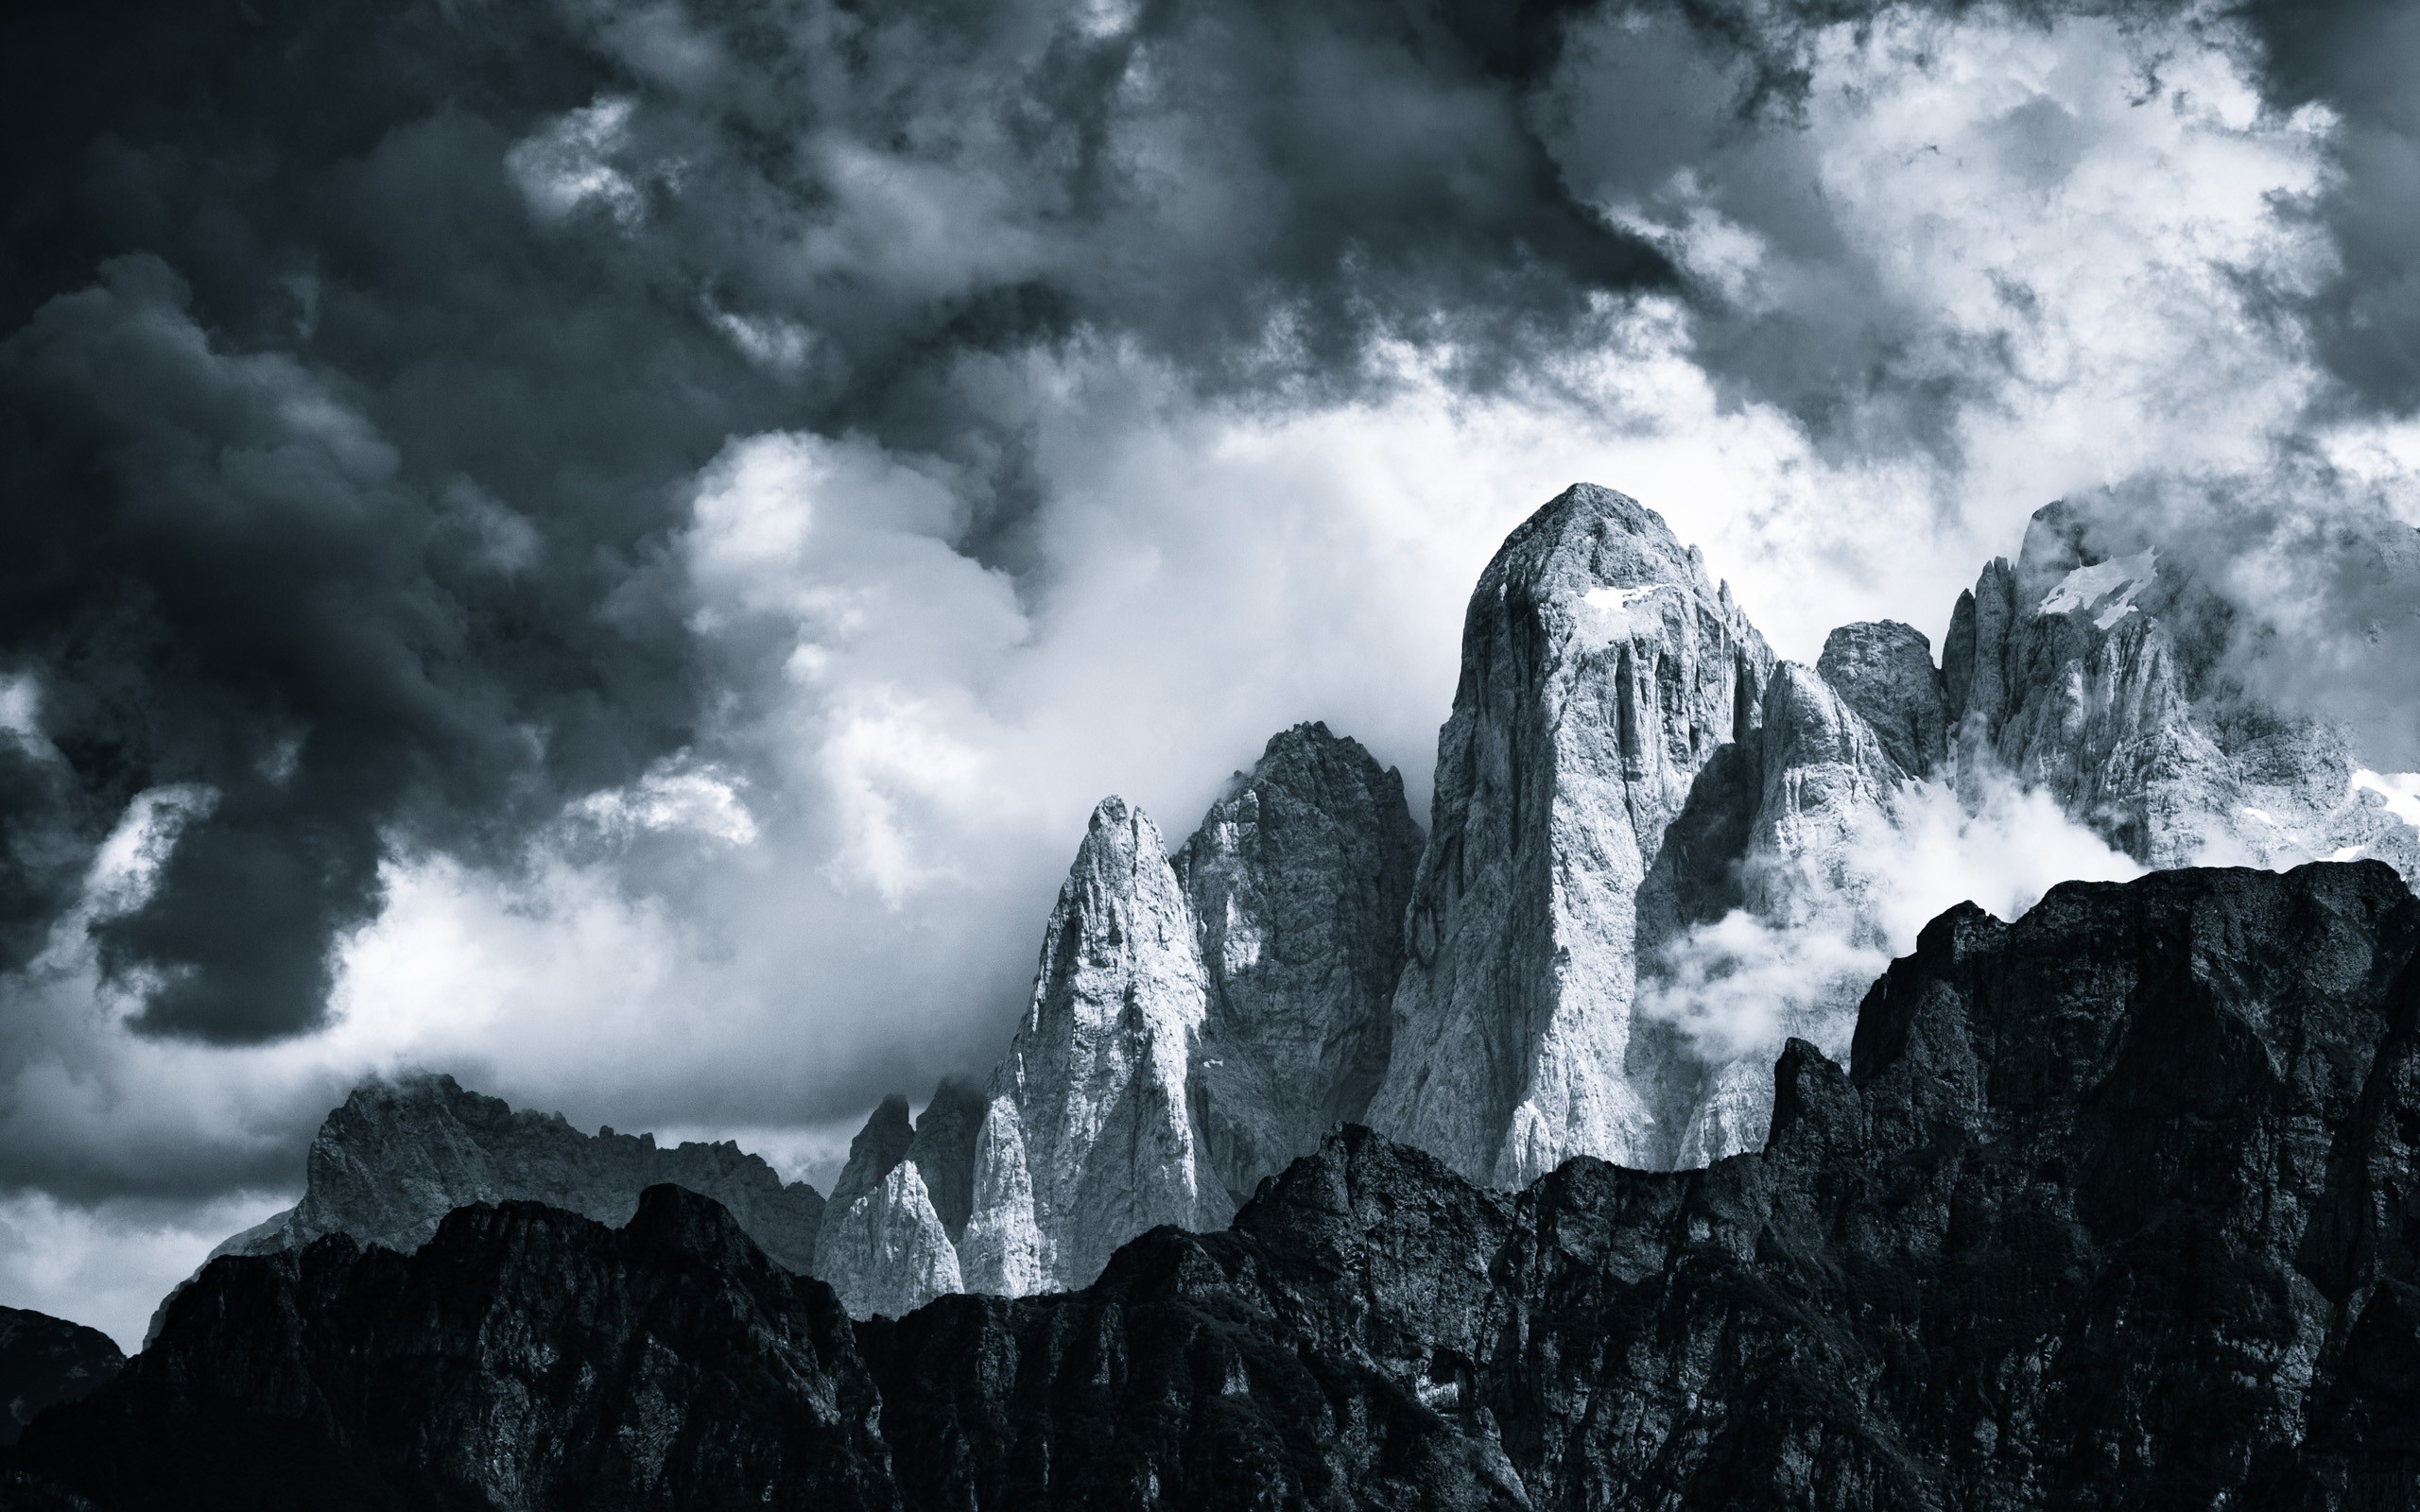 mountains, photography, monochrome, nature, landscape, Italy, Jakub Polomski, clouds, Dolomites (mountains) Gallery HD Wallpaper